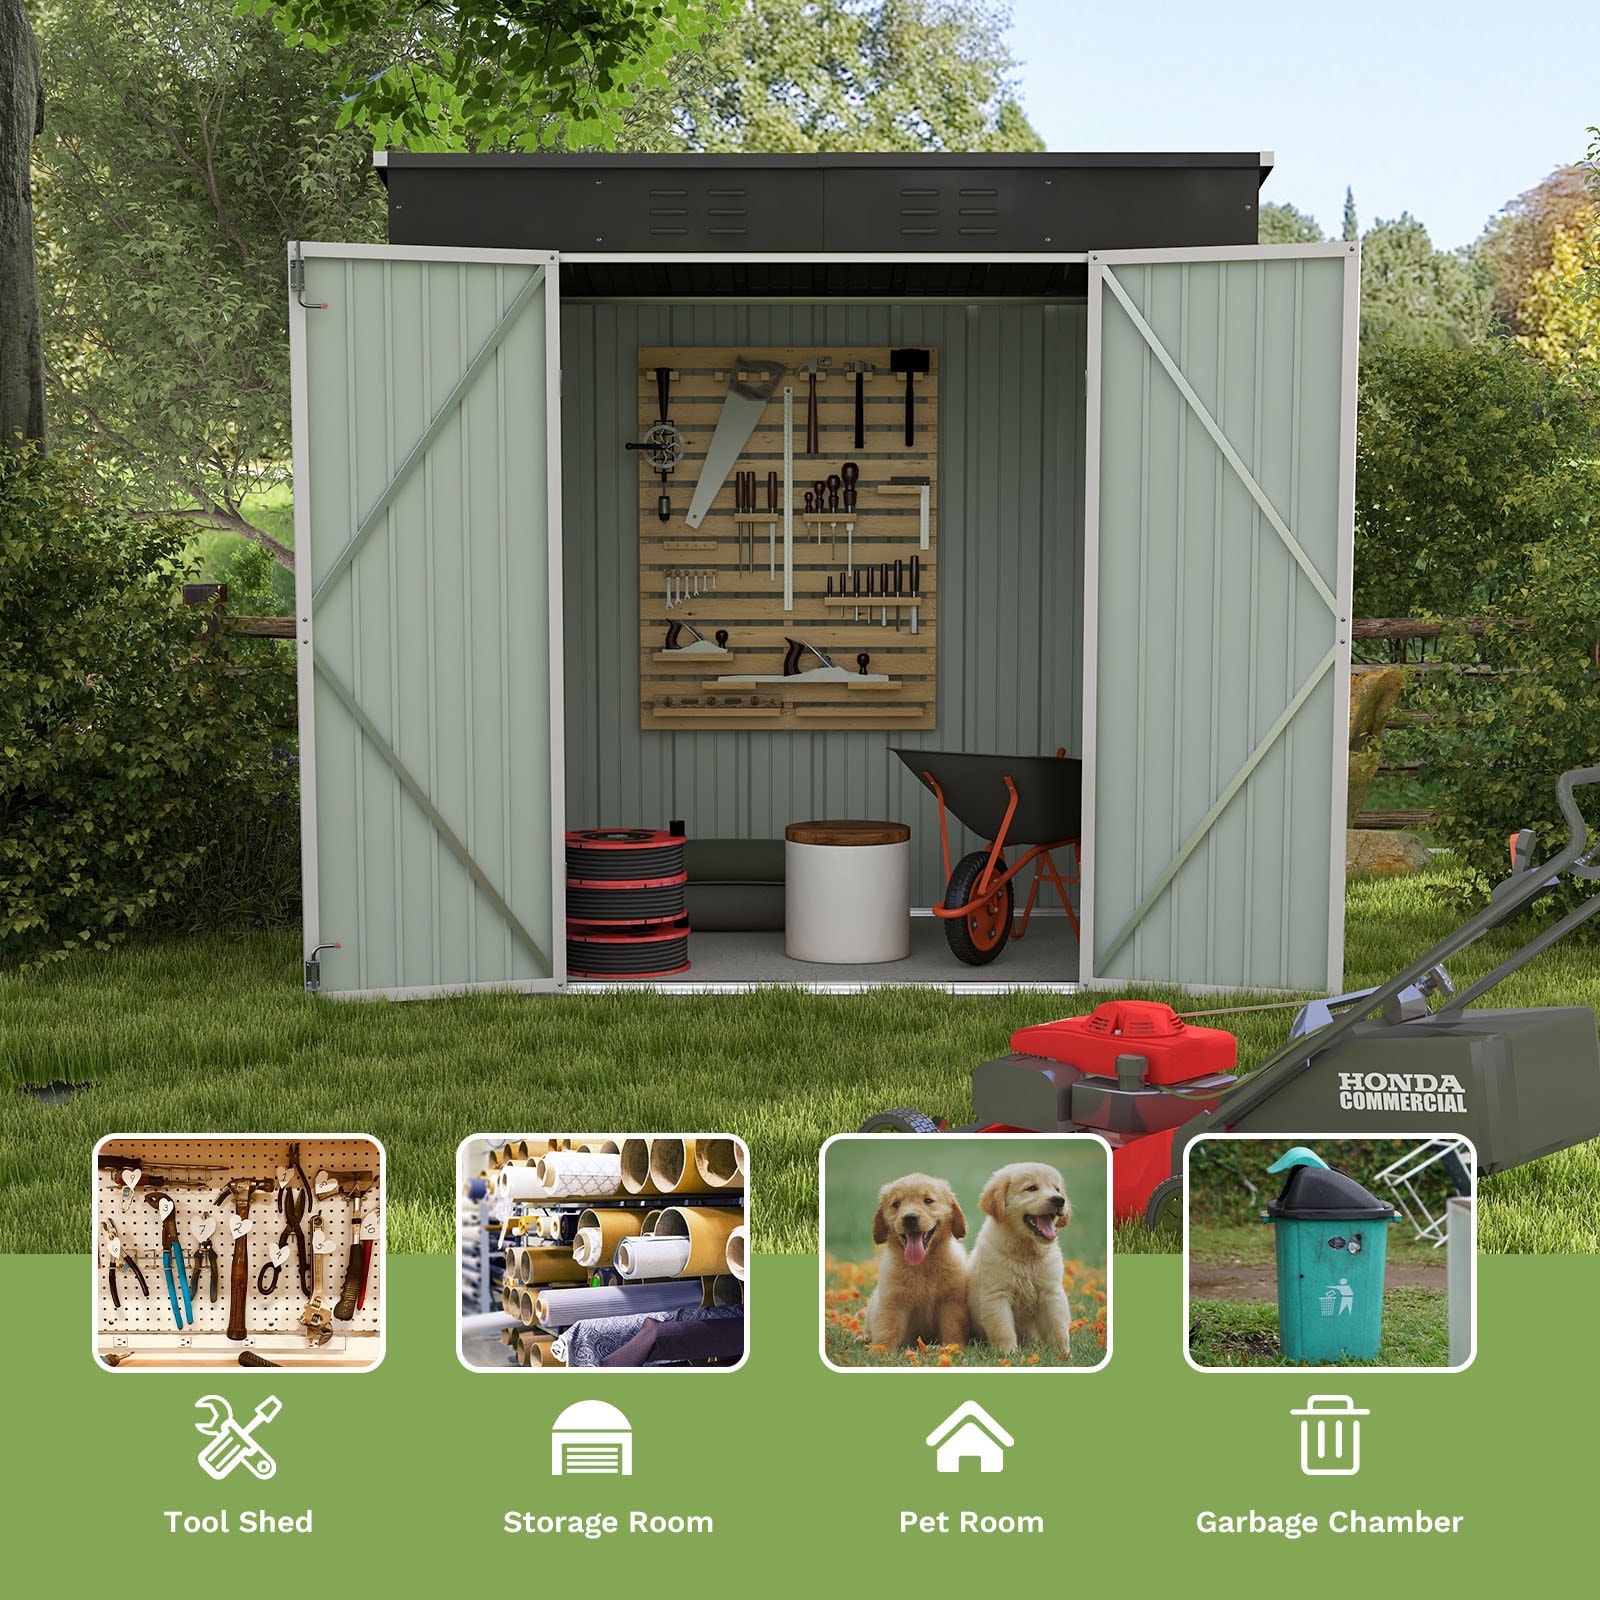 Patiowell 6-ft x 4-ft Galvanized Steel Storage Shed in the Metal ...